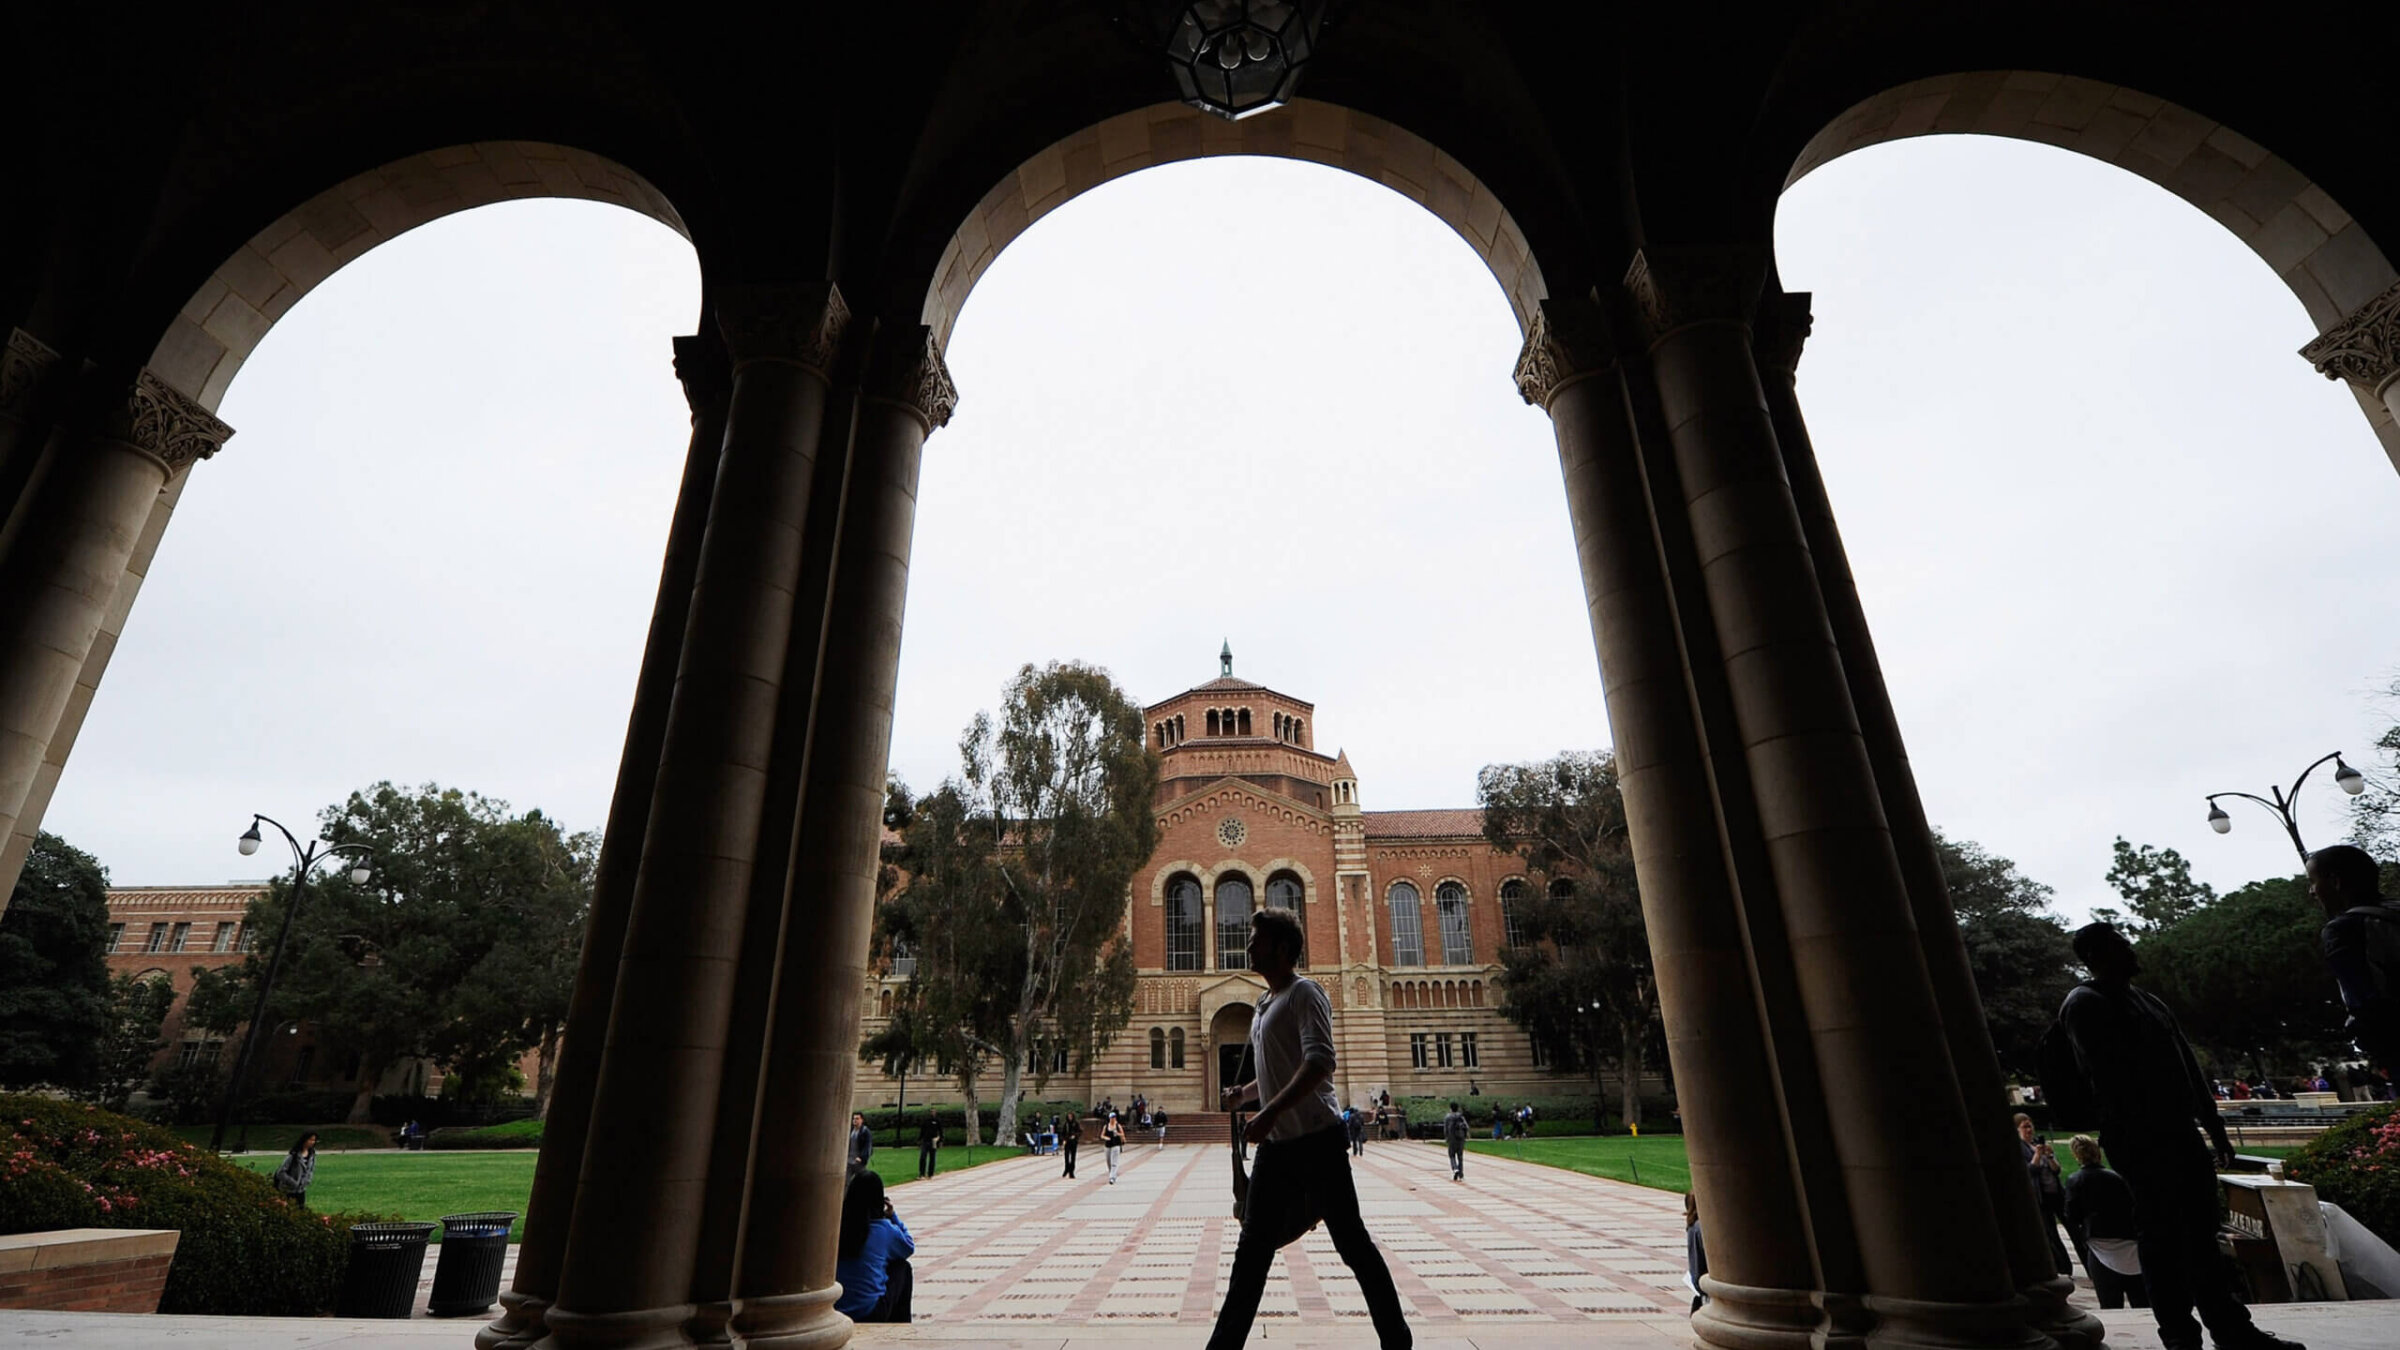 A student walks near Royce Hall on the campus of UCLA on April 23, 2012 in Los Angeles, California. 